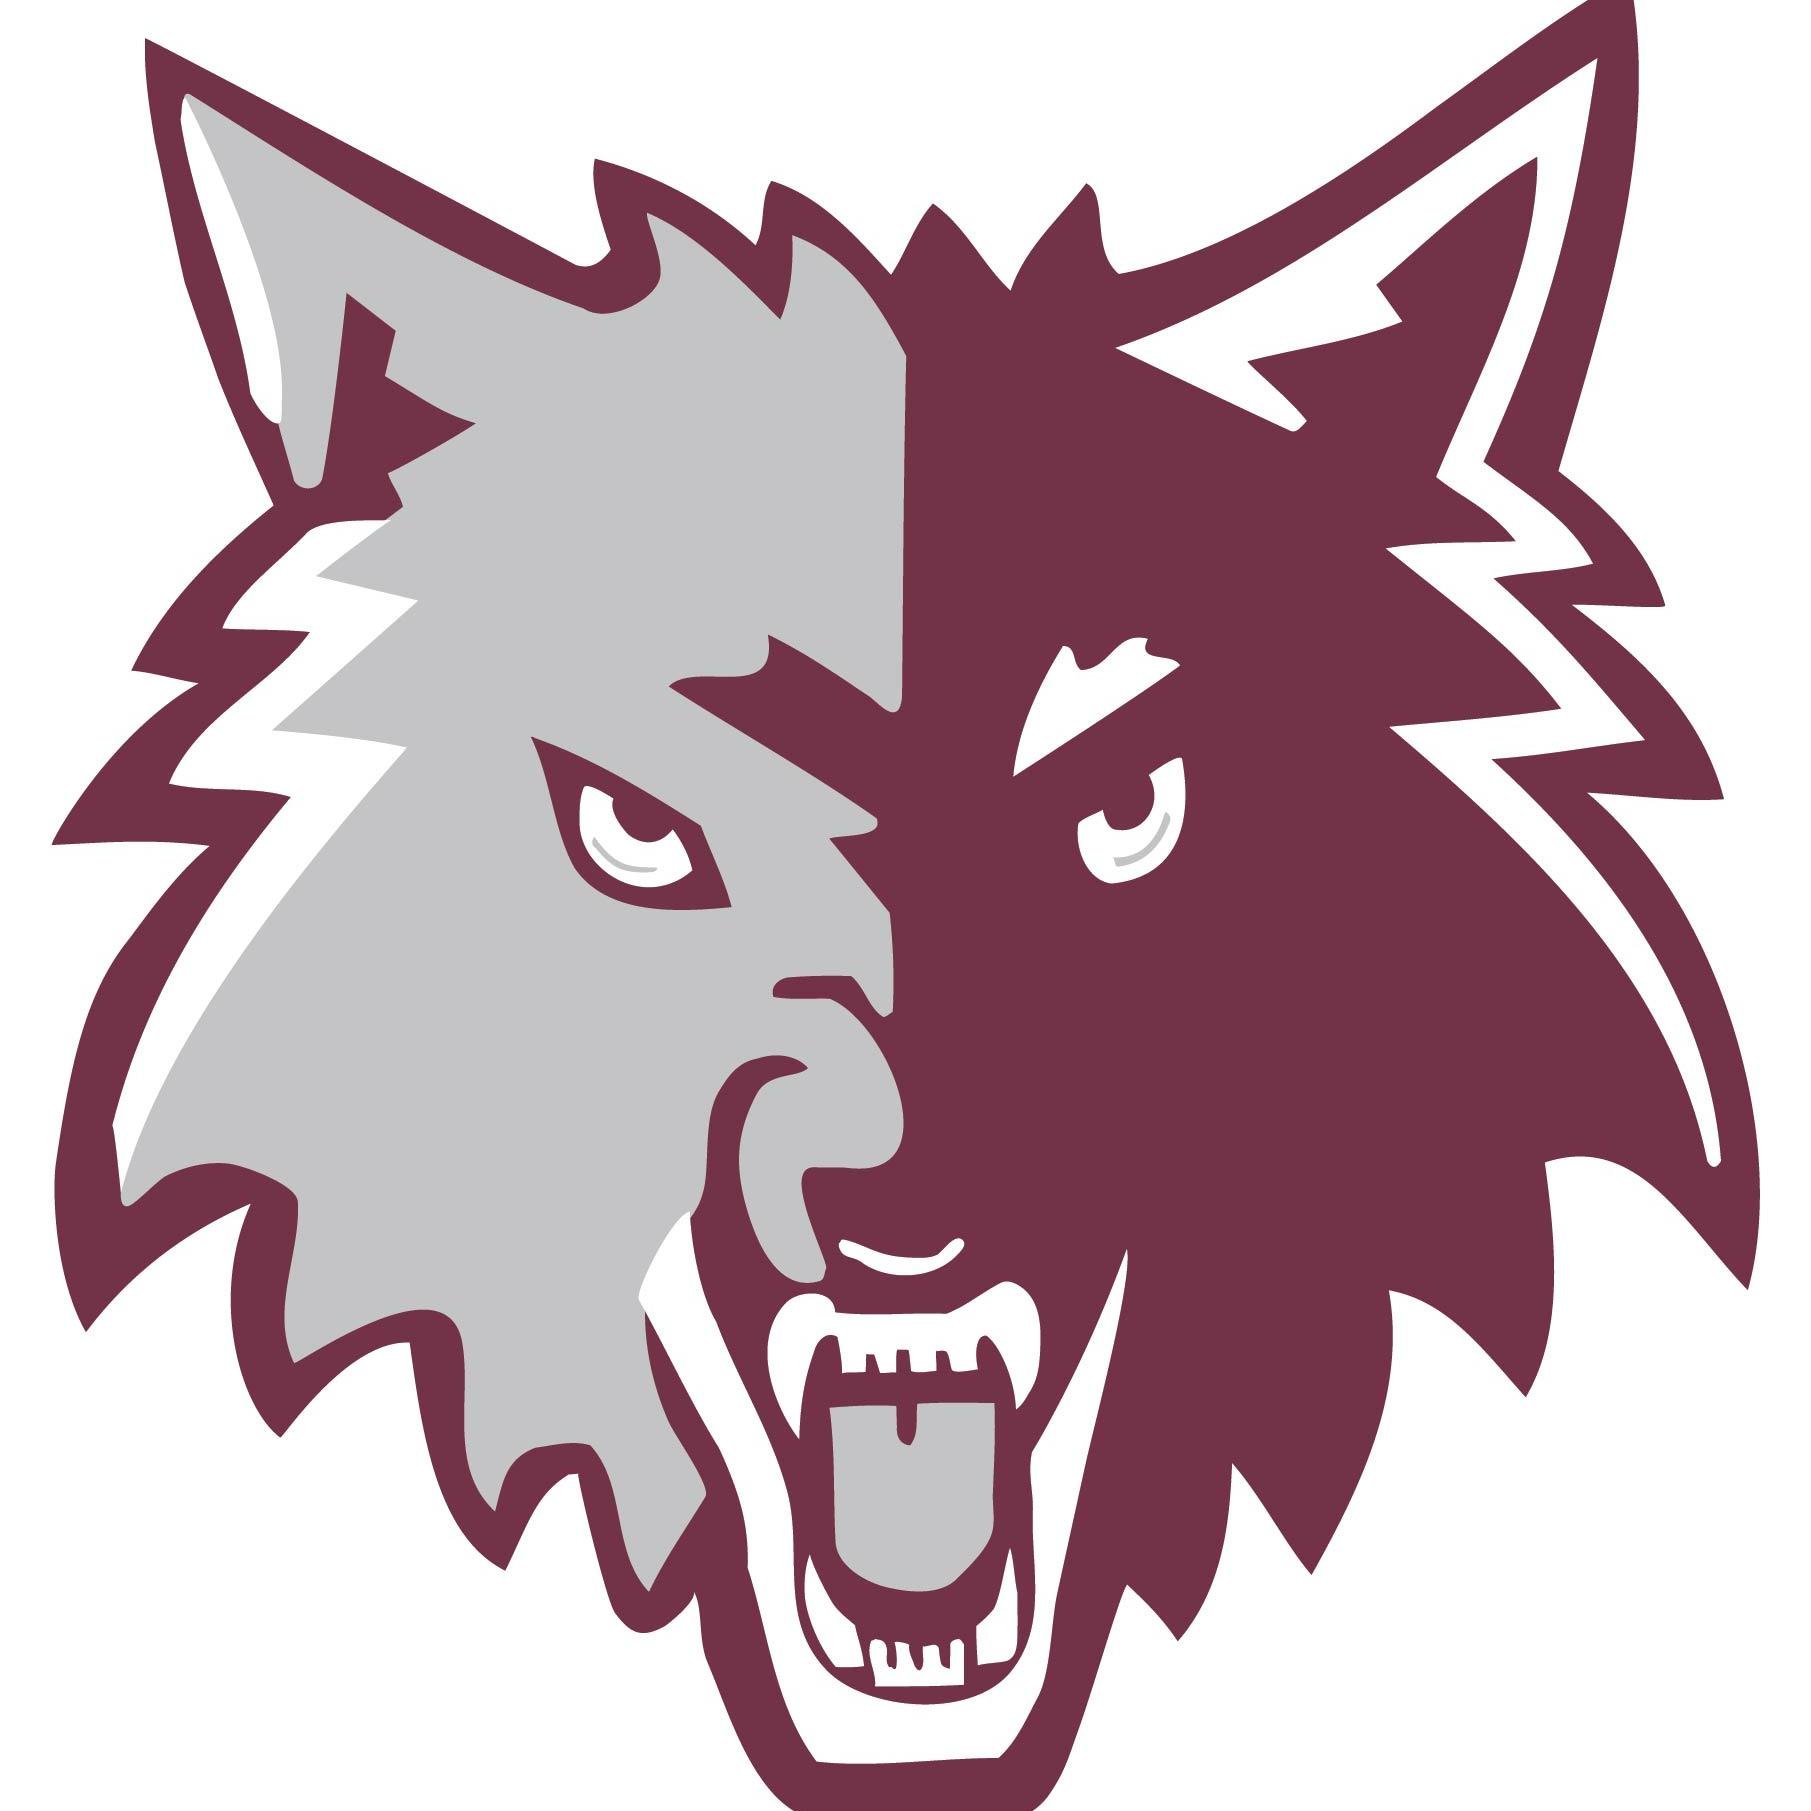 PR is a nationally ranked high school by @USNews. PR offers more than 200 courses and 30 extracurricular activities and sports. GO WOLVES! @CHSD155